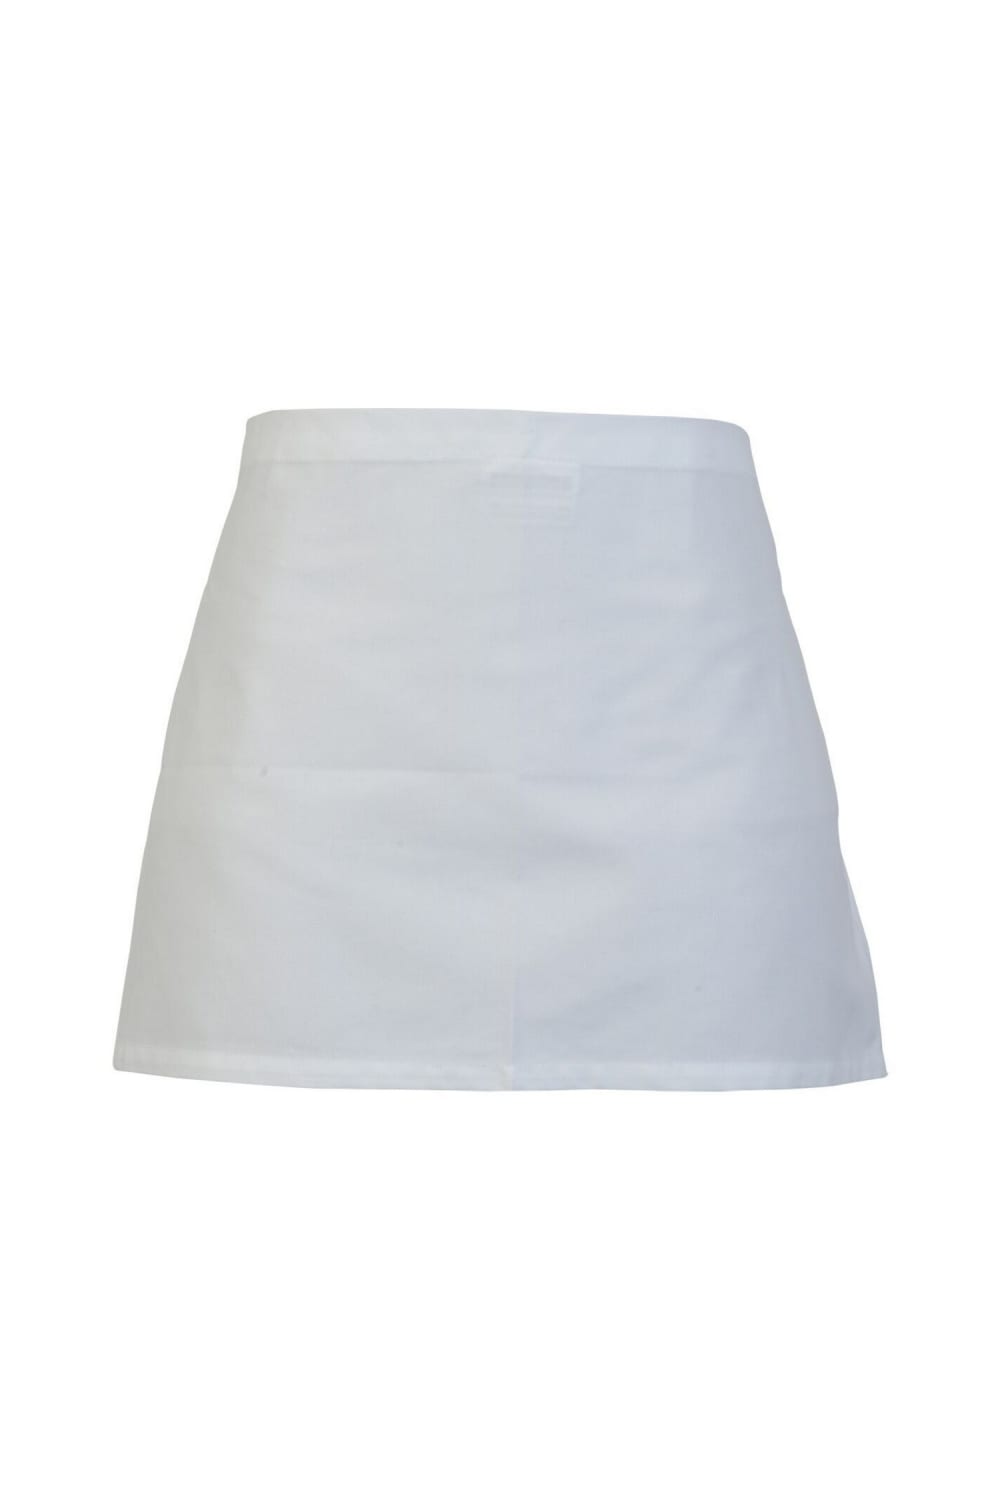 Adults Workwear Waist Apron In White - One Size